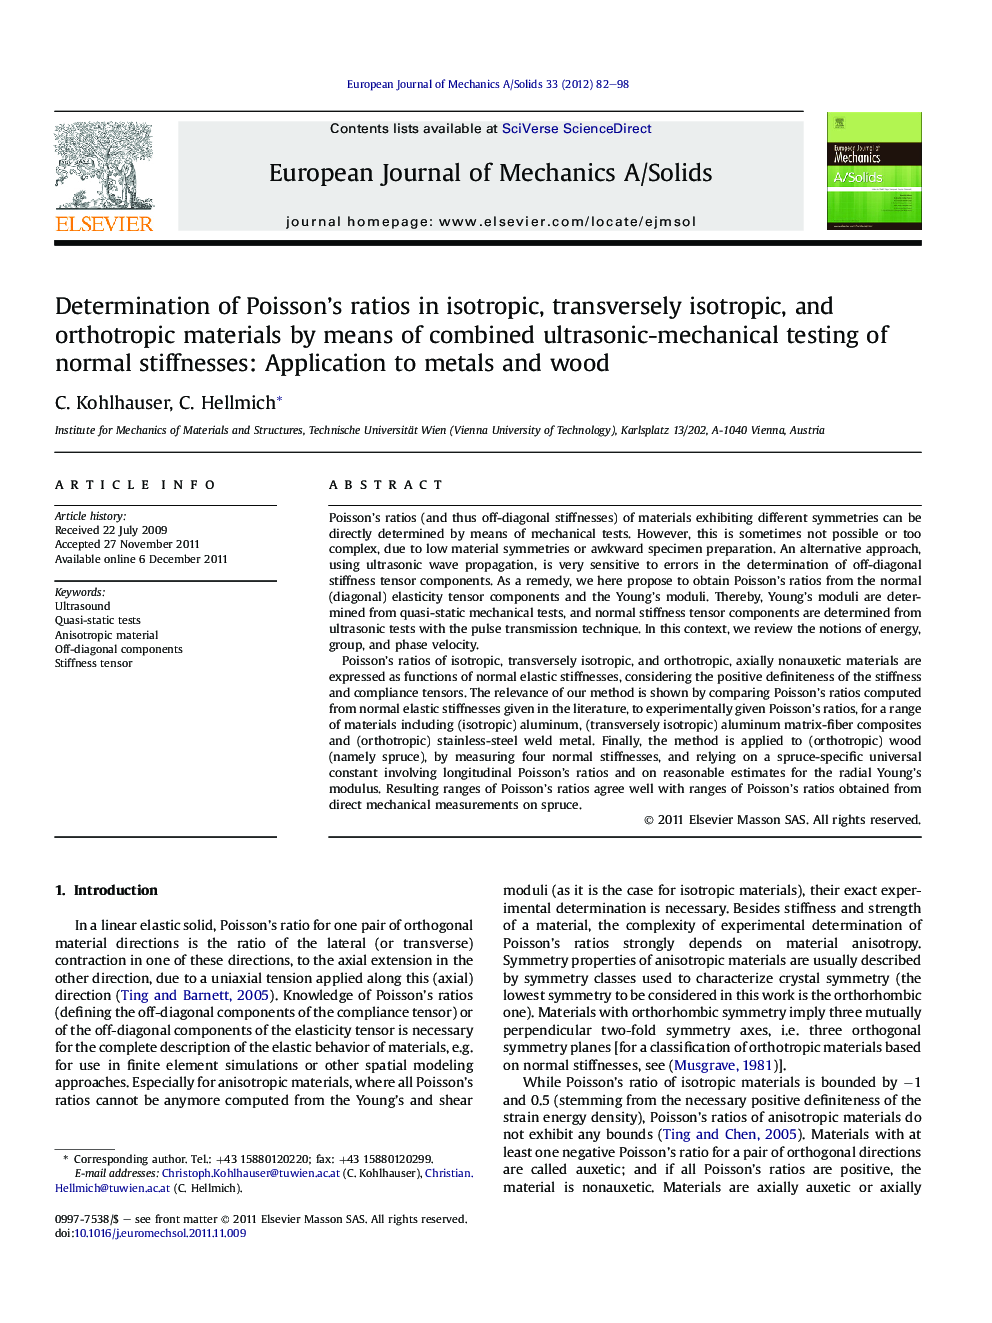 Determination of Poisson’s ratios in isotropic, transversely isotropic, and orthotropic materials by means of combined ultrasonic-mechanical testing of normal stiffnesses: Application to metals and wood